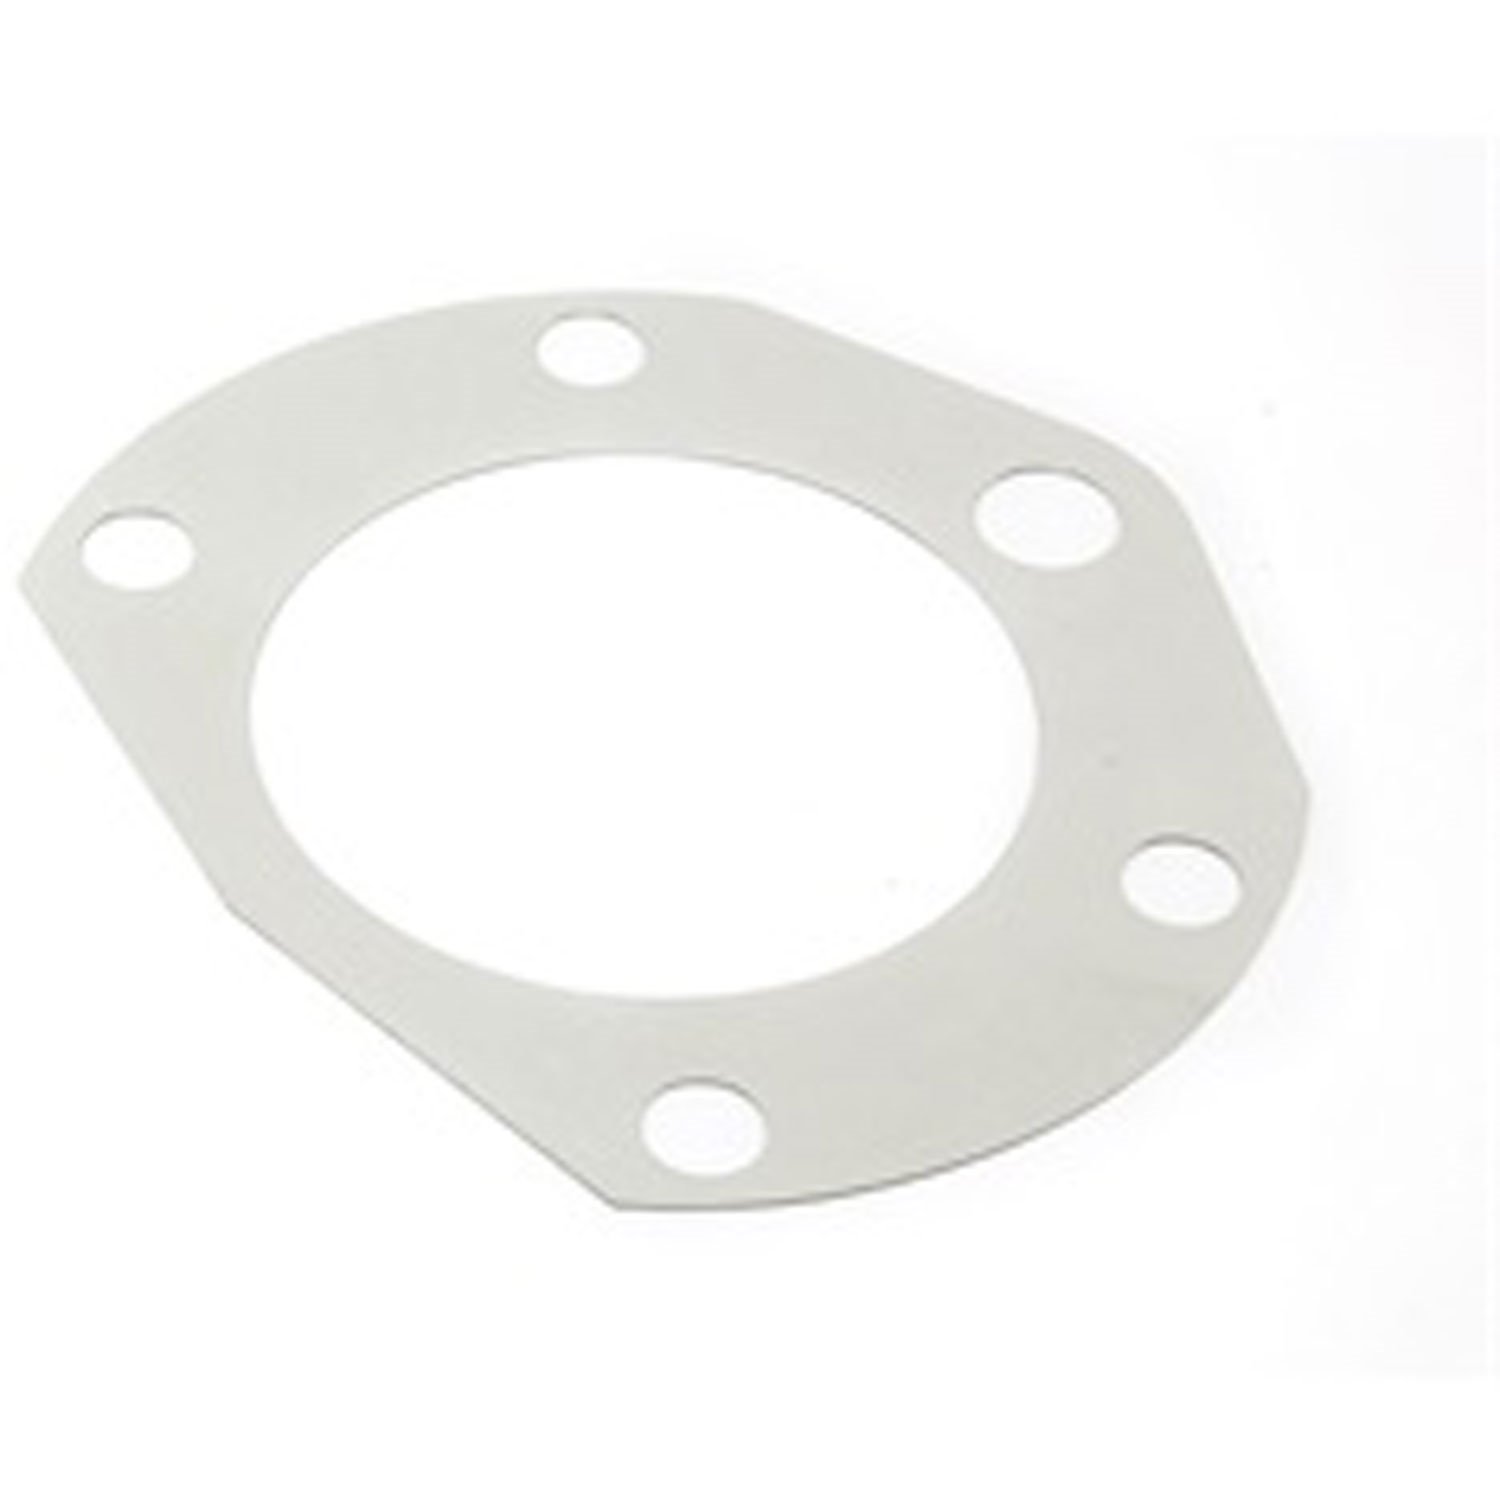 This 0.0010 inch axle bearing retainer shim from Omix-ADA fits the AMC 20 rear axle found in 76-86 Jeep CJ models.